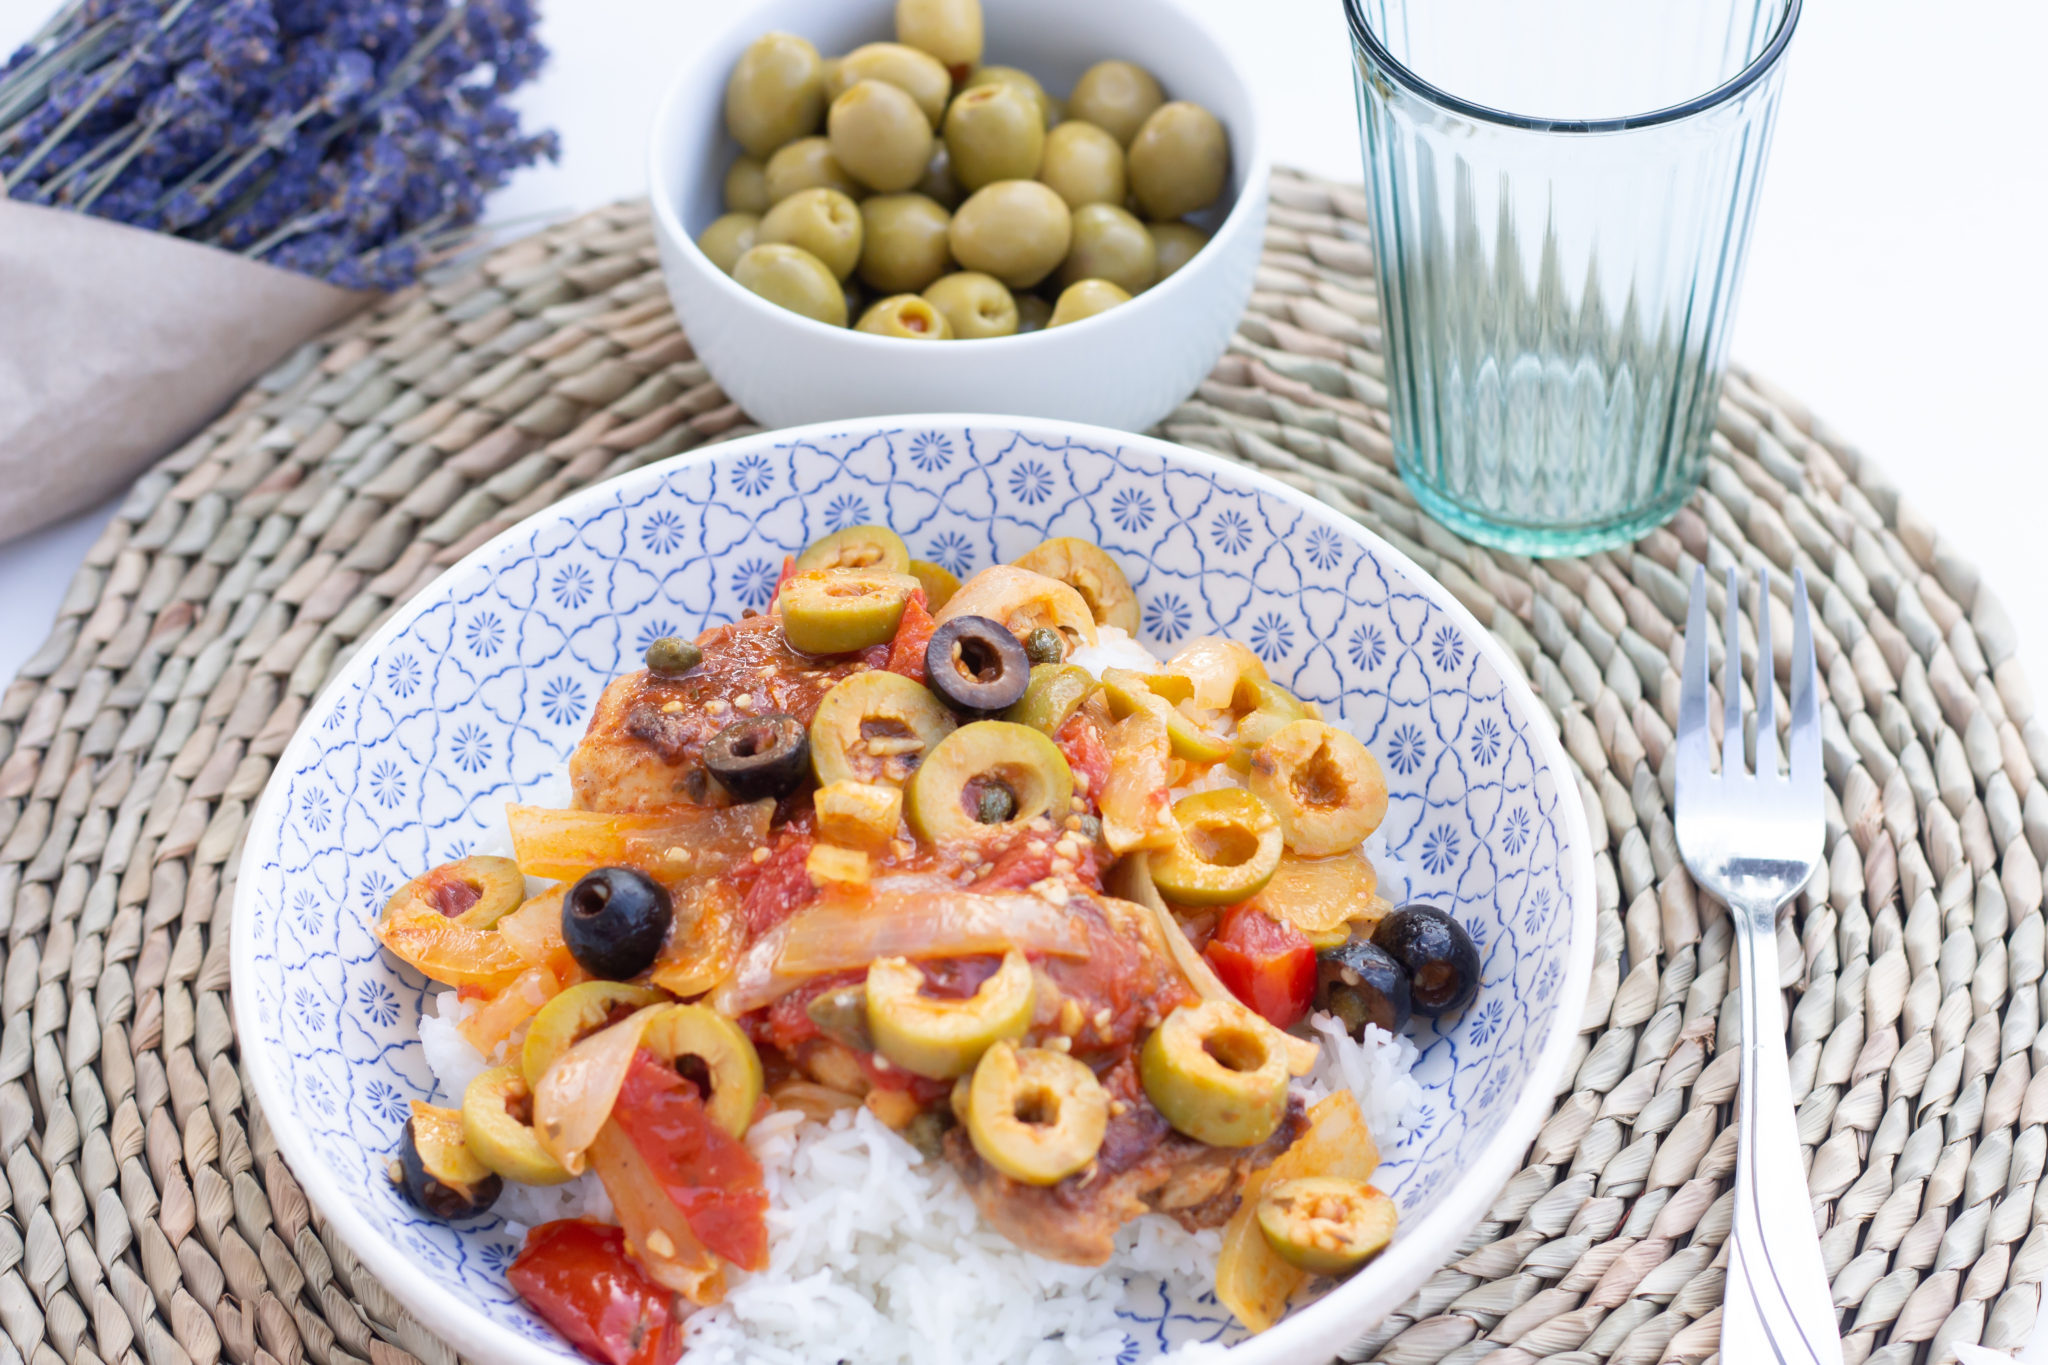 Veracruz Sauce Recipe With Olives From Spain